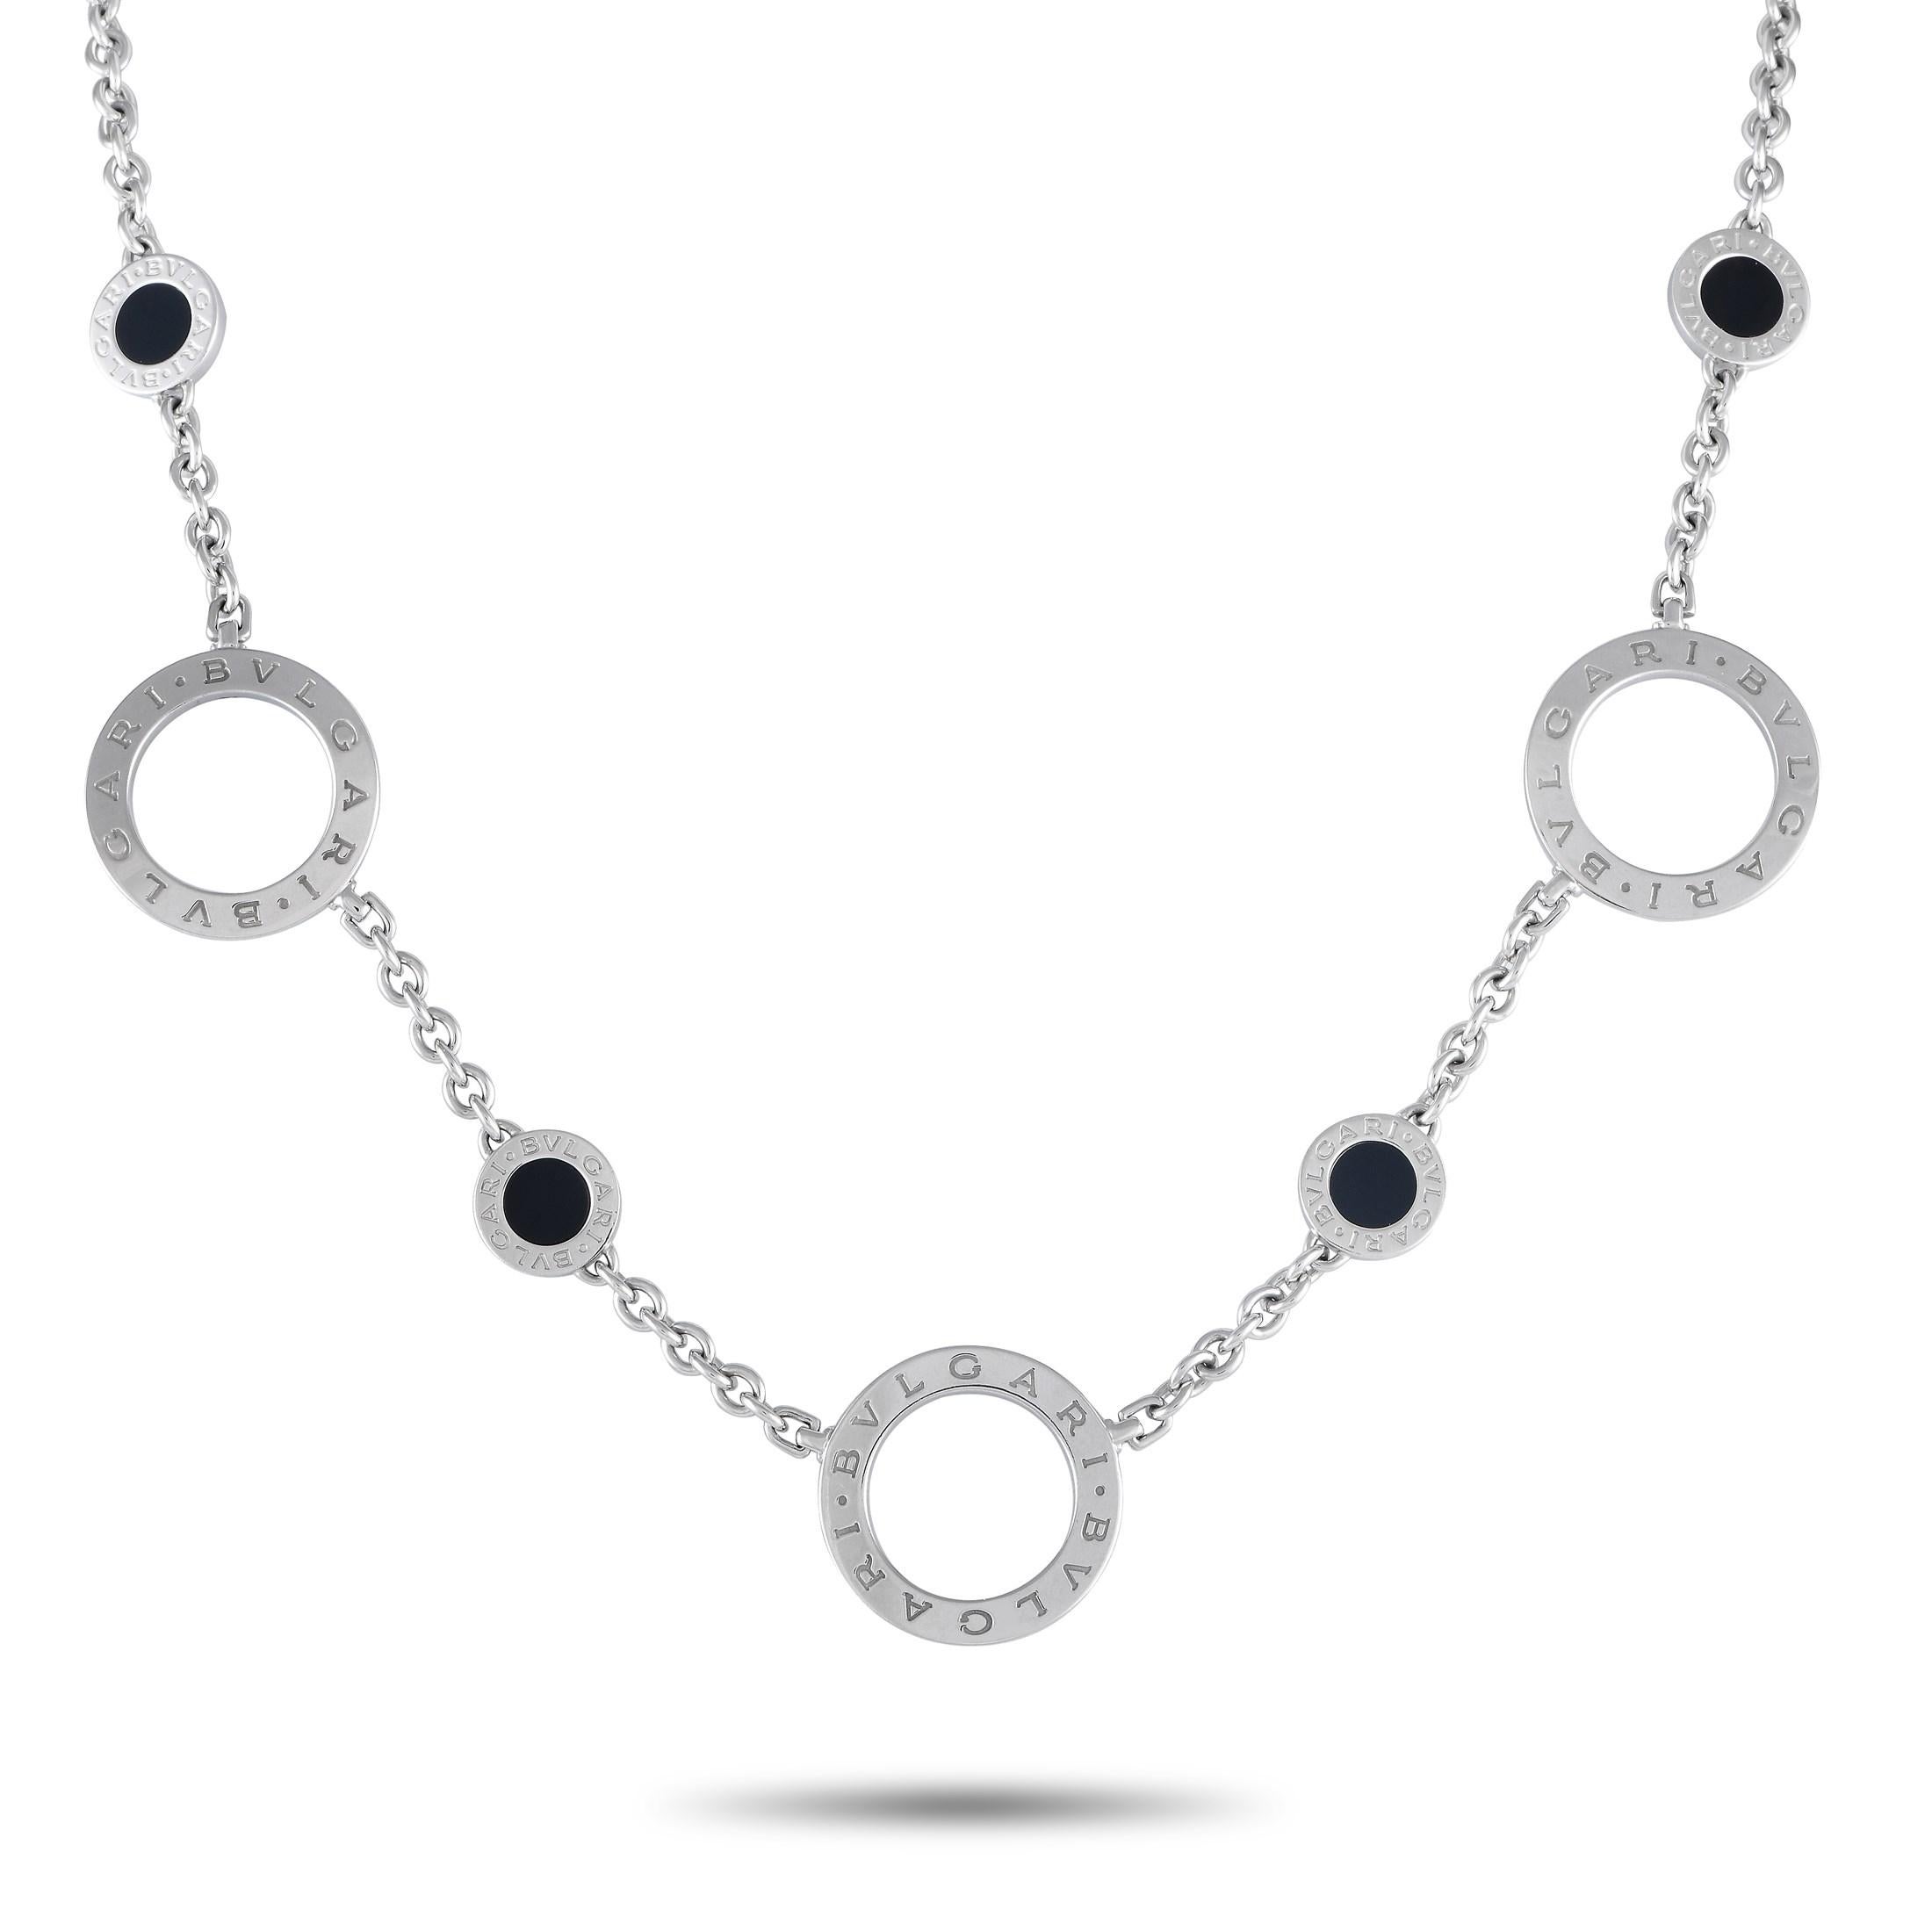 Bvlgari Bvlgari 18K White Gold Onyx Necklace In Excellent Condition For Sale In Southampton, PA